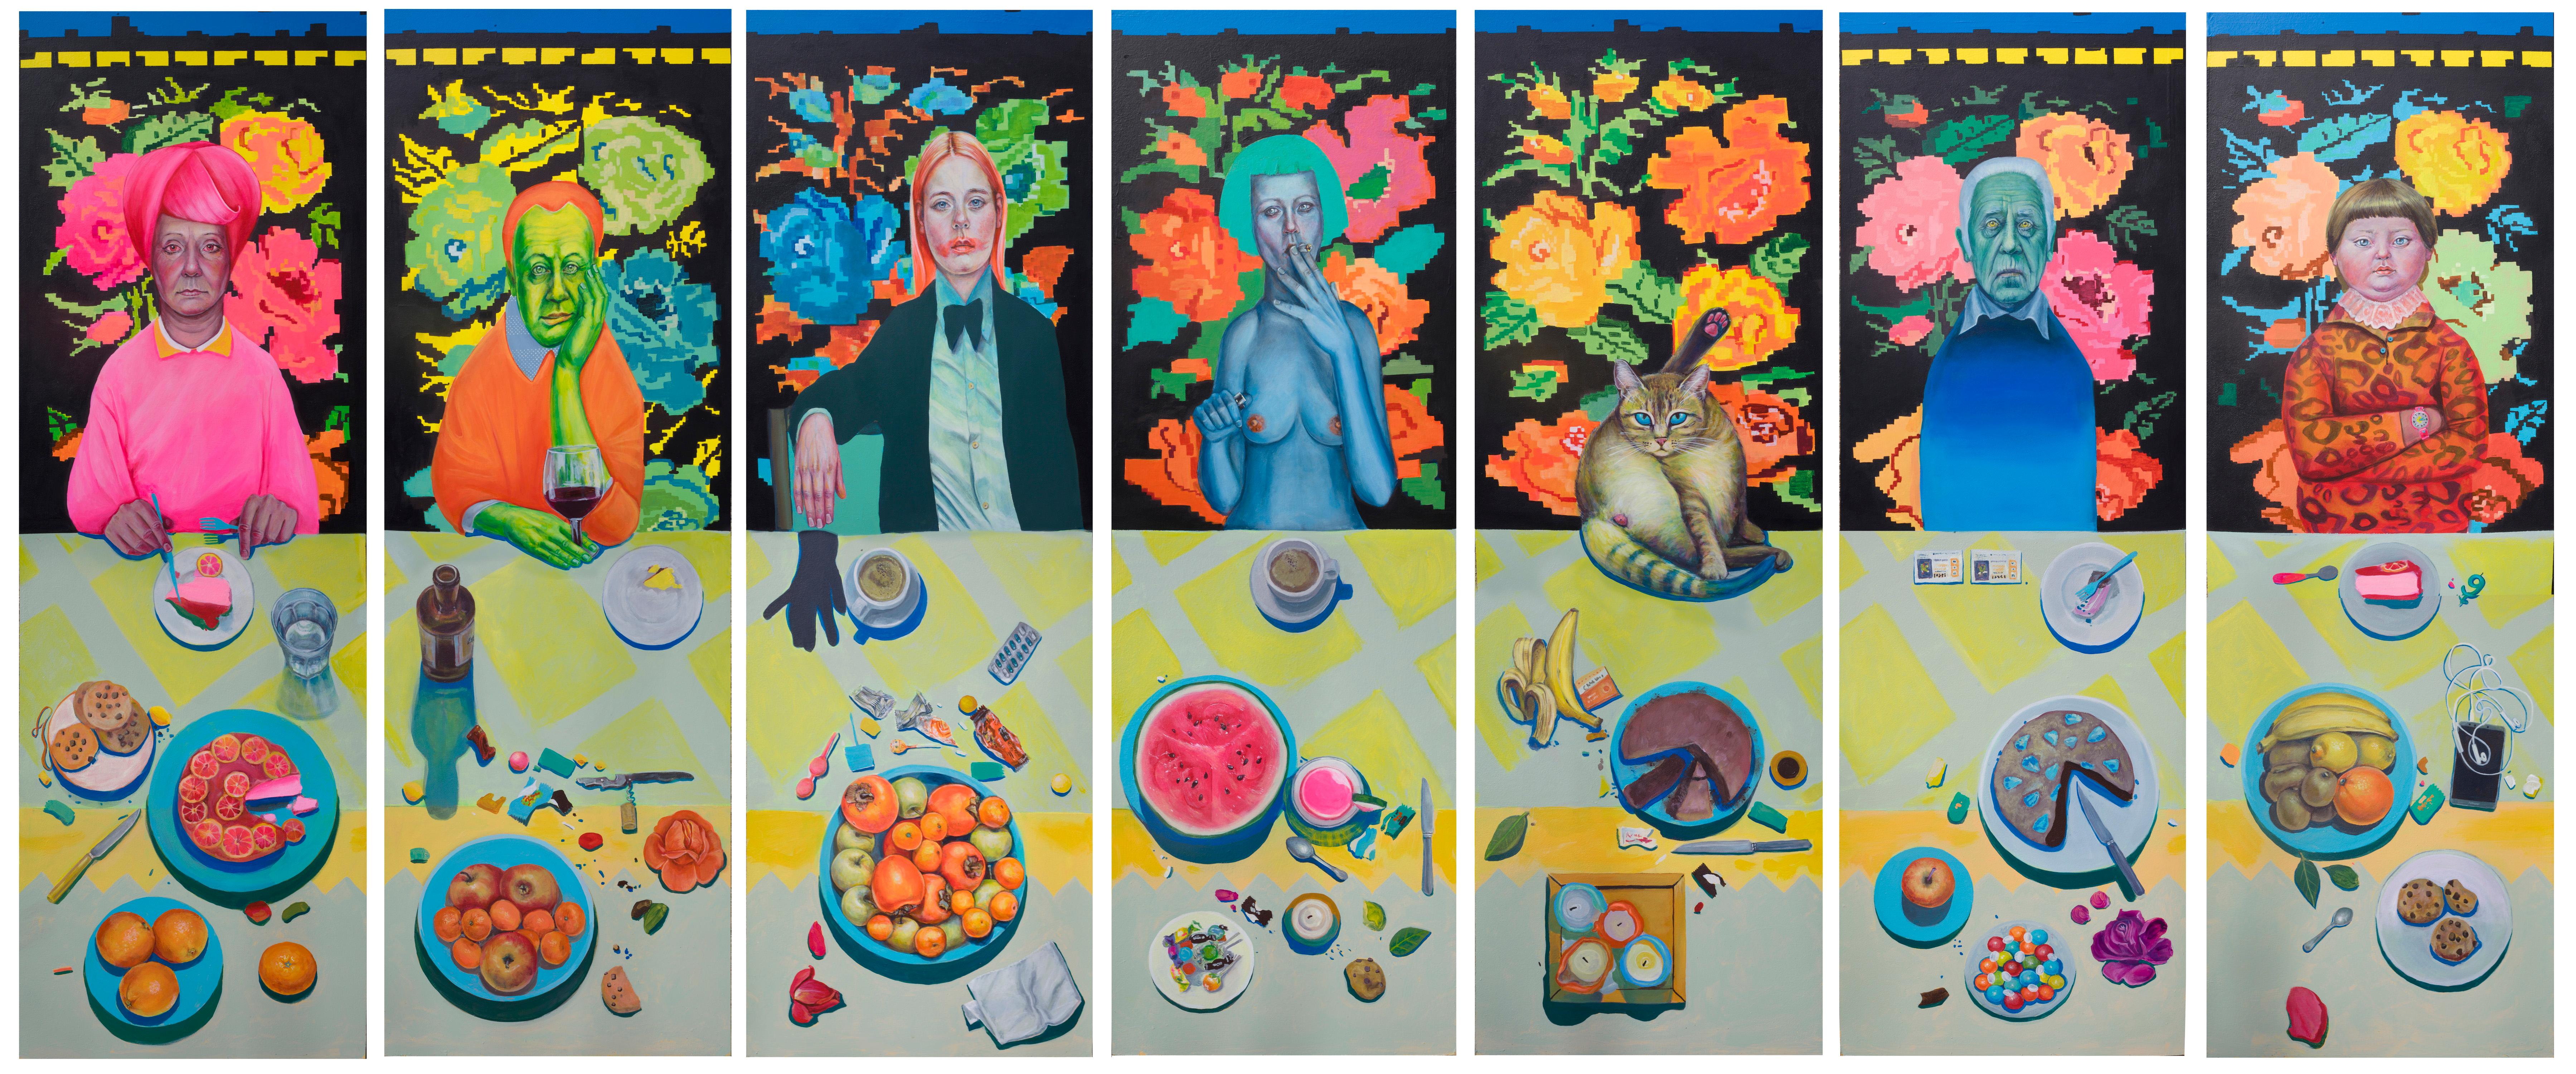 Seven Long and Narrow Portraits . "The Dinners". 10/25 Limited Edition on Dibond